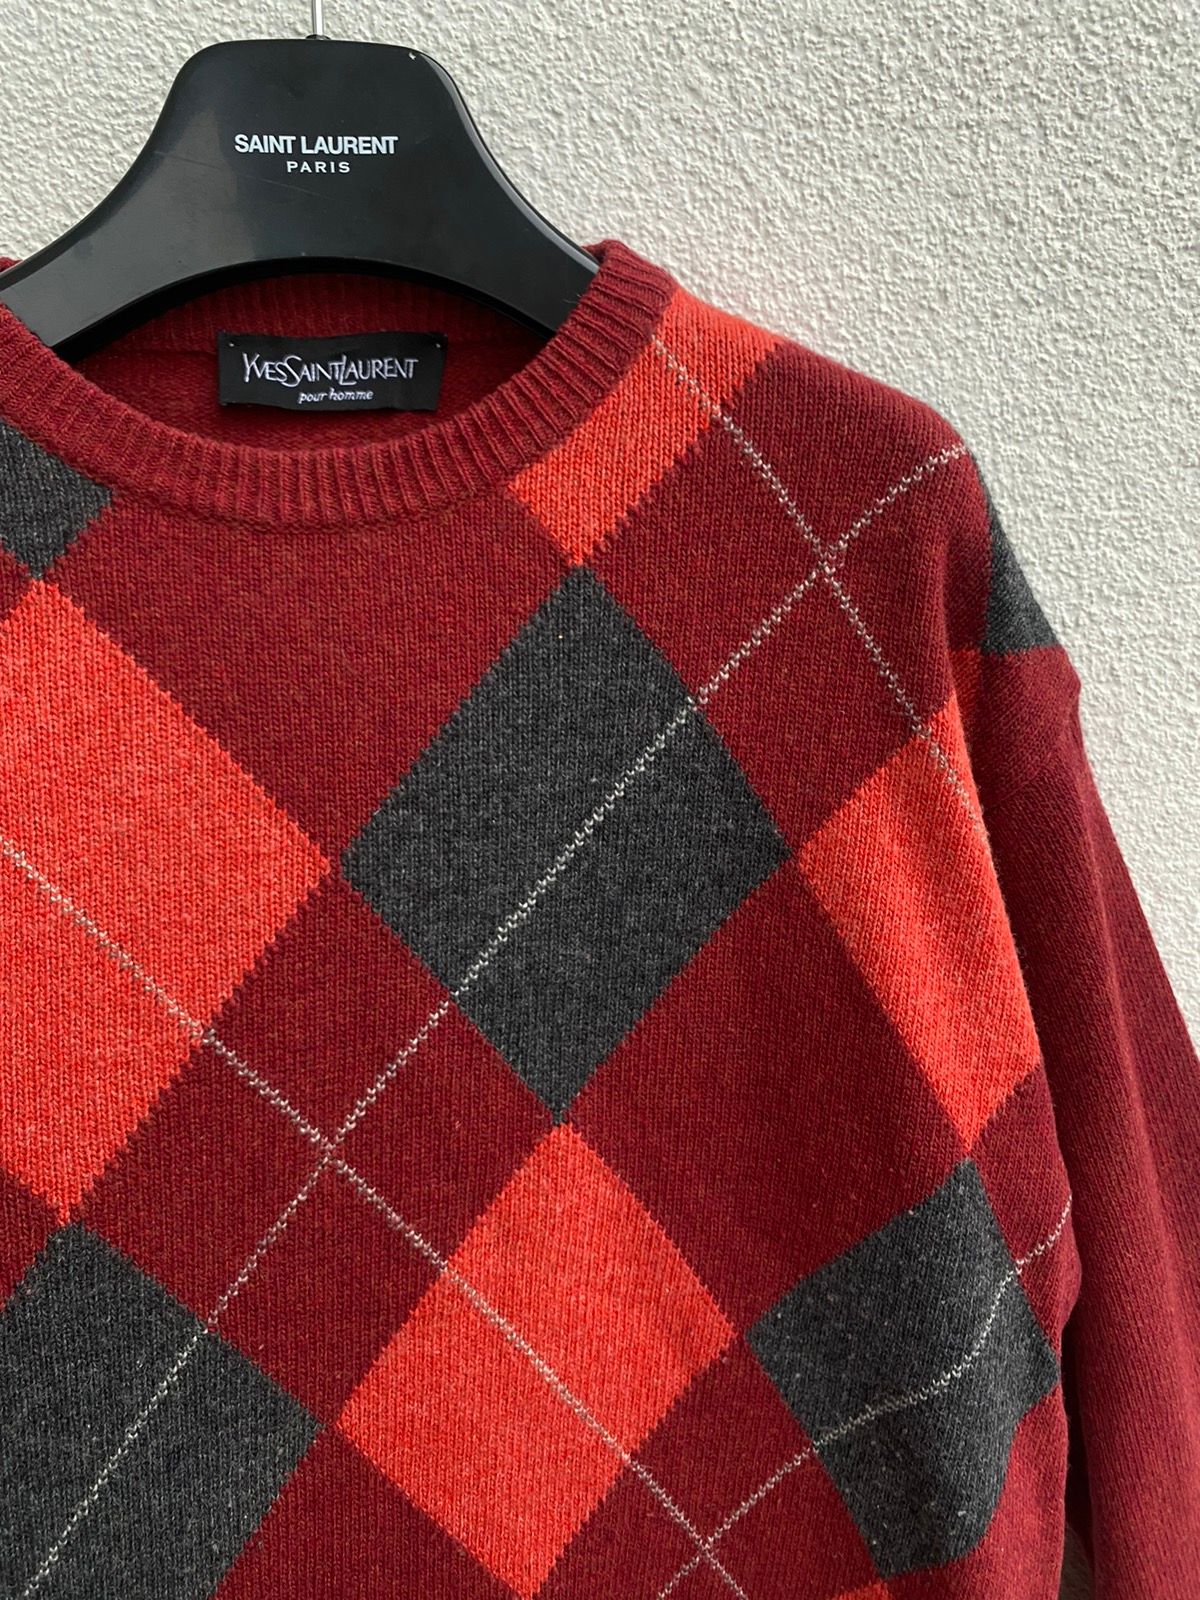 Vintage 🇮🇹italy 90’s YSL Sweater Wool Knit Soft Size US L / EU 52-54 / 3 - 1 Preview